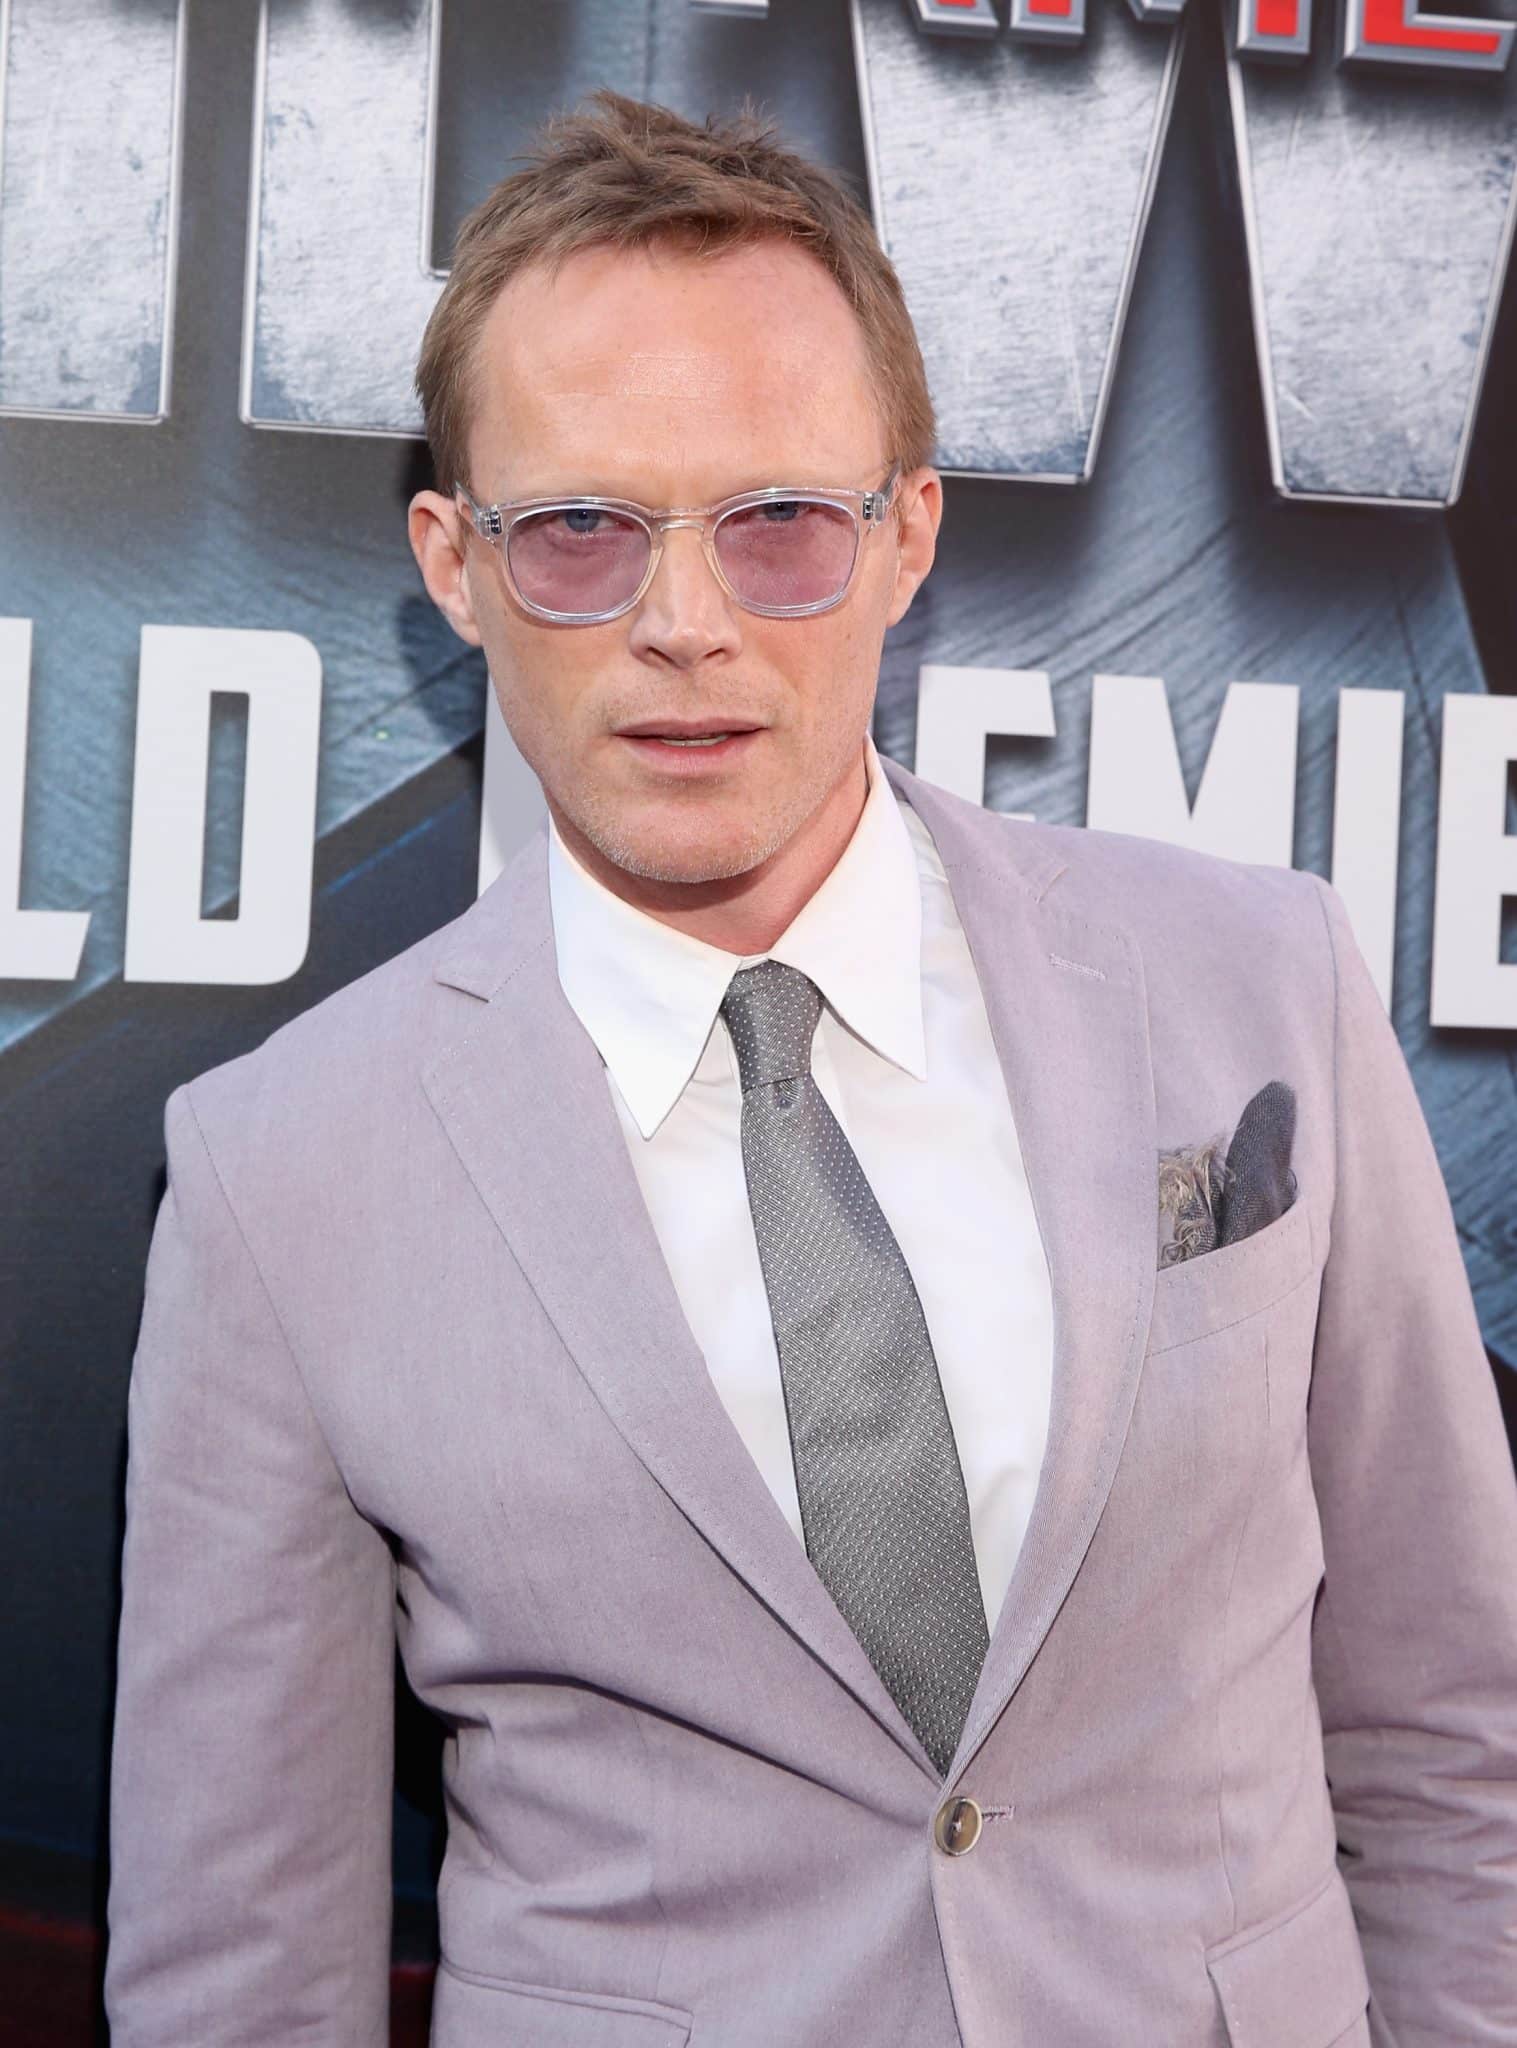 HOLLYWOOD, CALIFORNIA - APRIL 12: Actor Paul Bettany attends The World Premiere of Marvel's "Captain America: Civil War" at Dolby Theatre on April 12, 2016 in Los Angeles, California. (Photo by Jesse Grant/Getty Images for Disney) *** Local Caption *** Paul Bettany